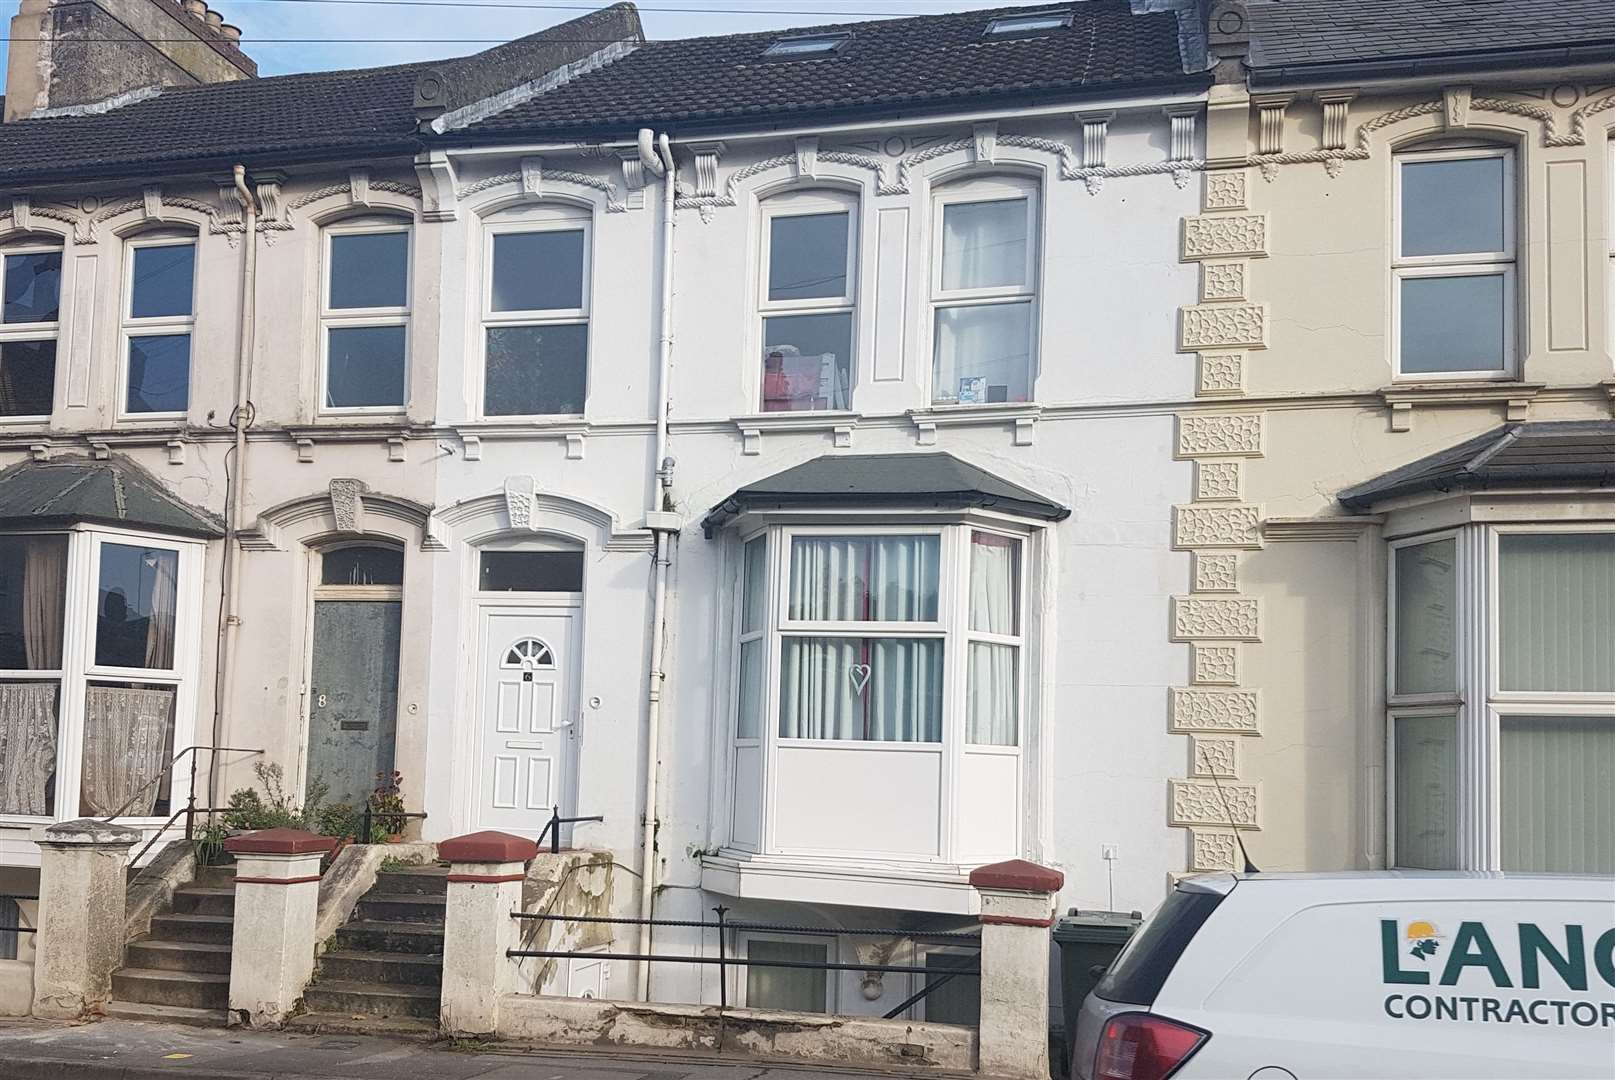 Landlord Josh Ahmad has been fined £5,000 for not notifying the council of tenants in this Canterbury Road property (20317816)